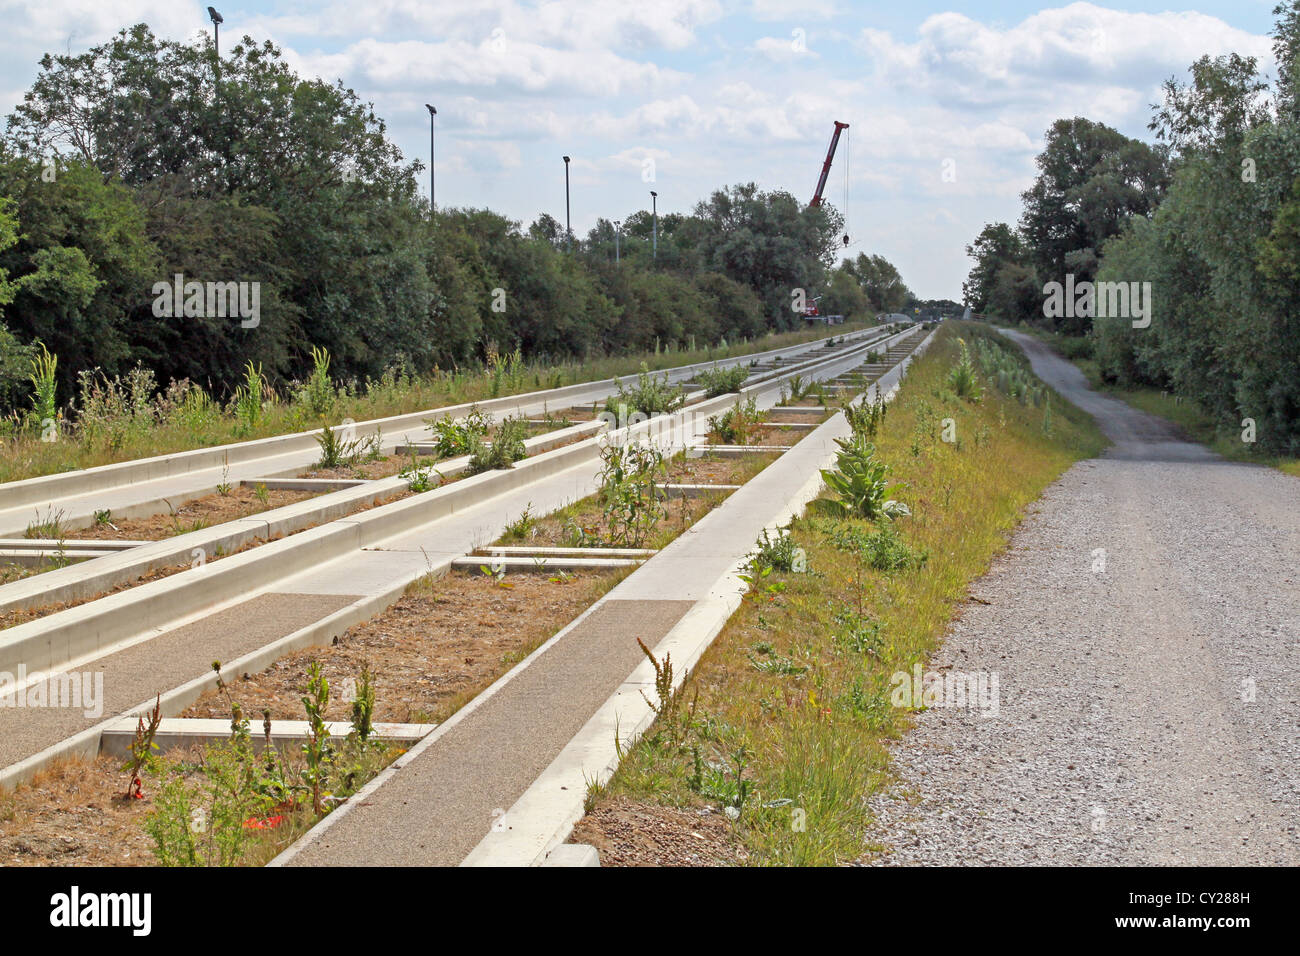 The Guided bus way that connects Cambridge and St Ives in Cambridgeshire England. Stock Photo